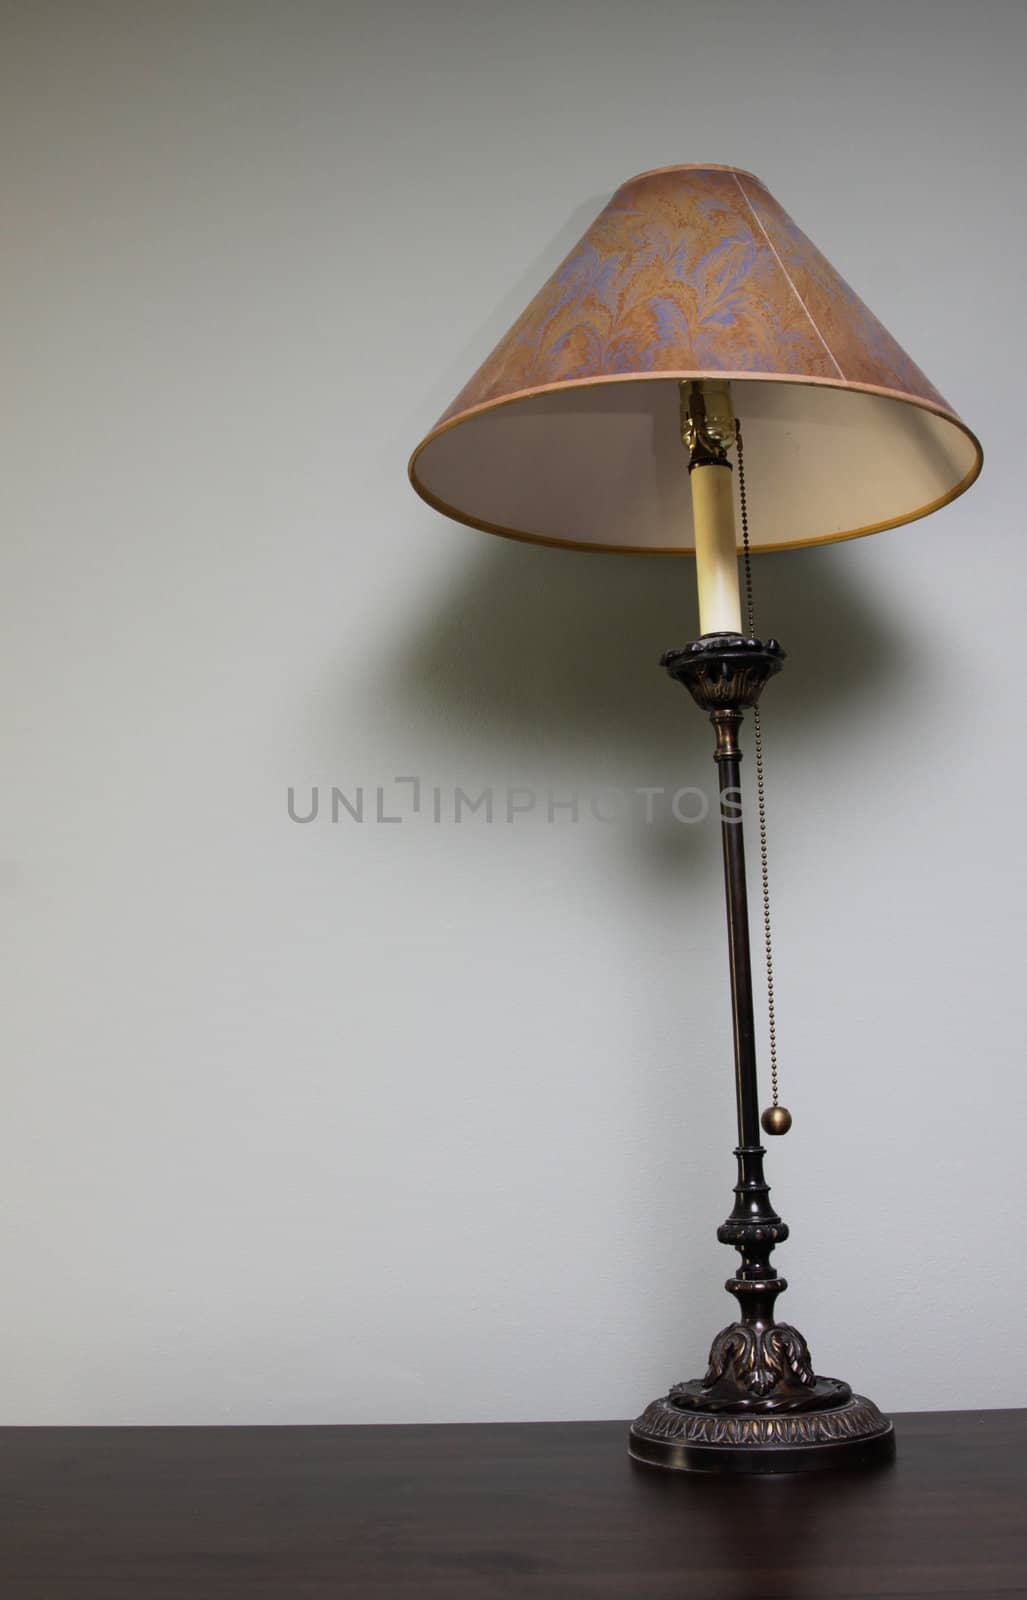 A lamp sitting on a table with copy-space.